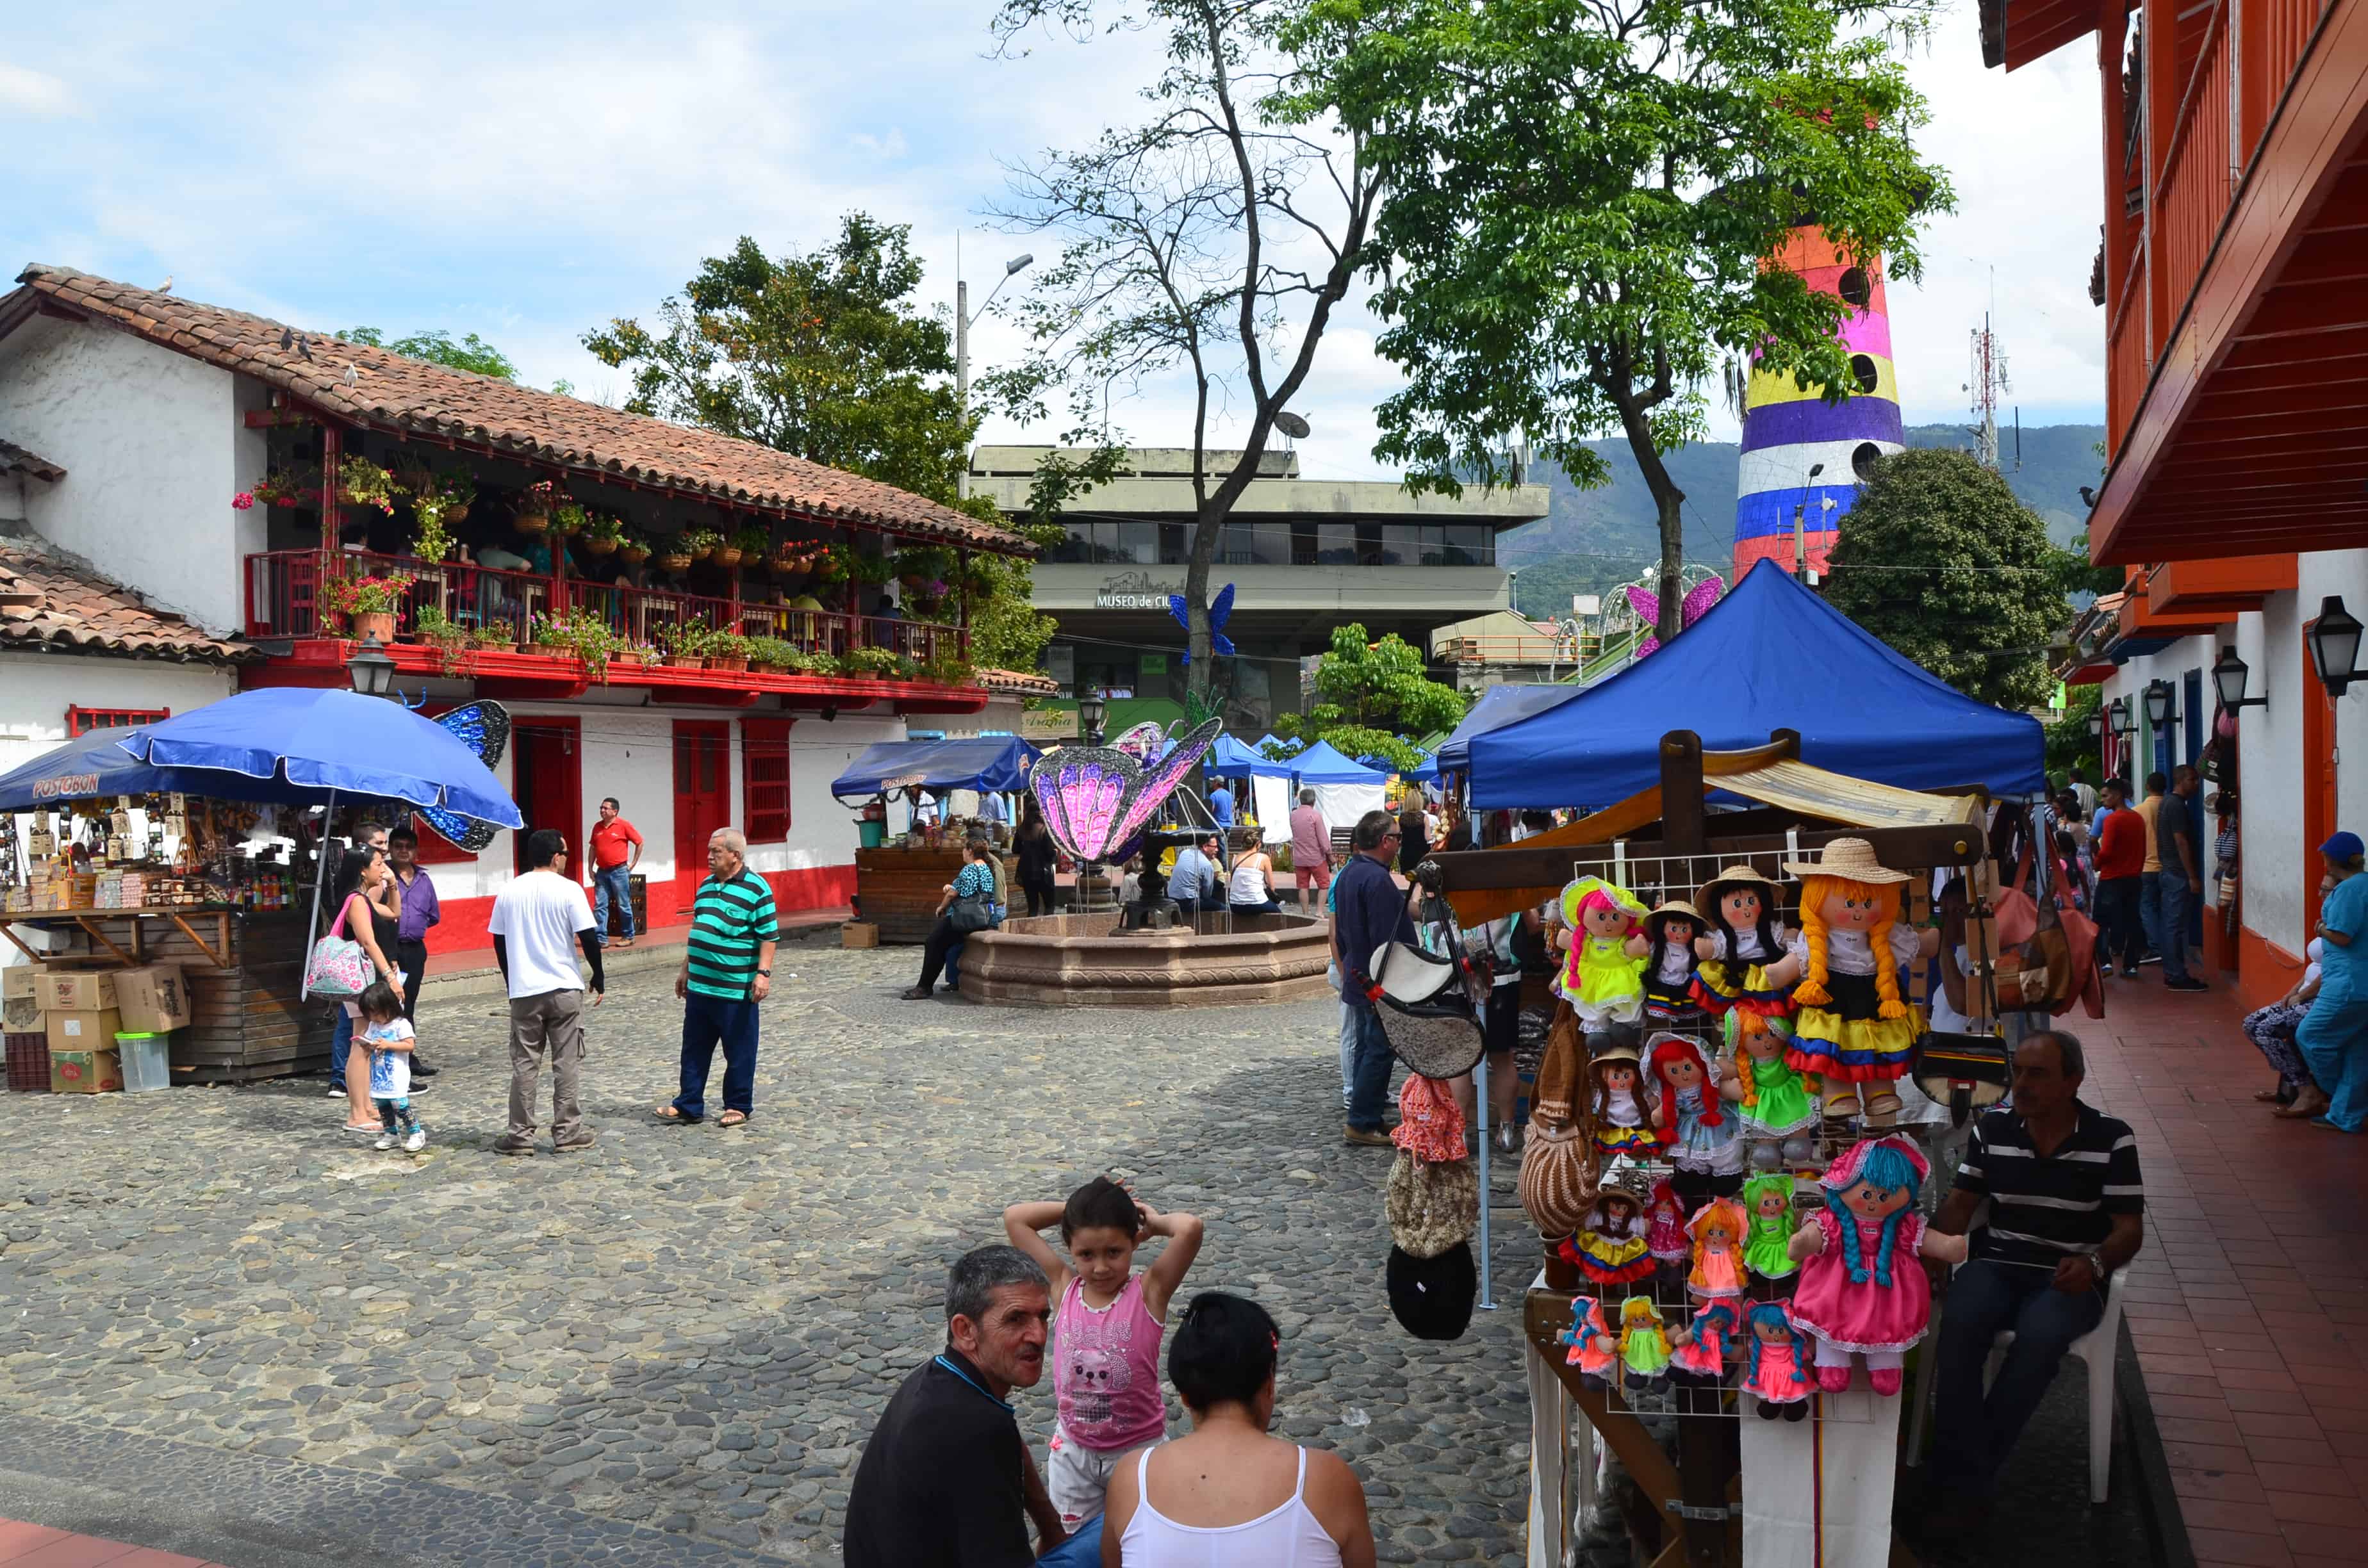 The village at Pueblito Paisa in Medellín, Antioquia, Colombia